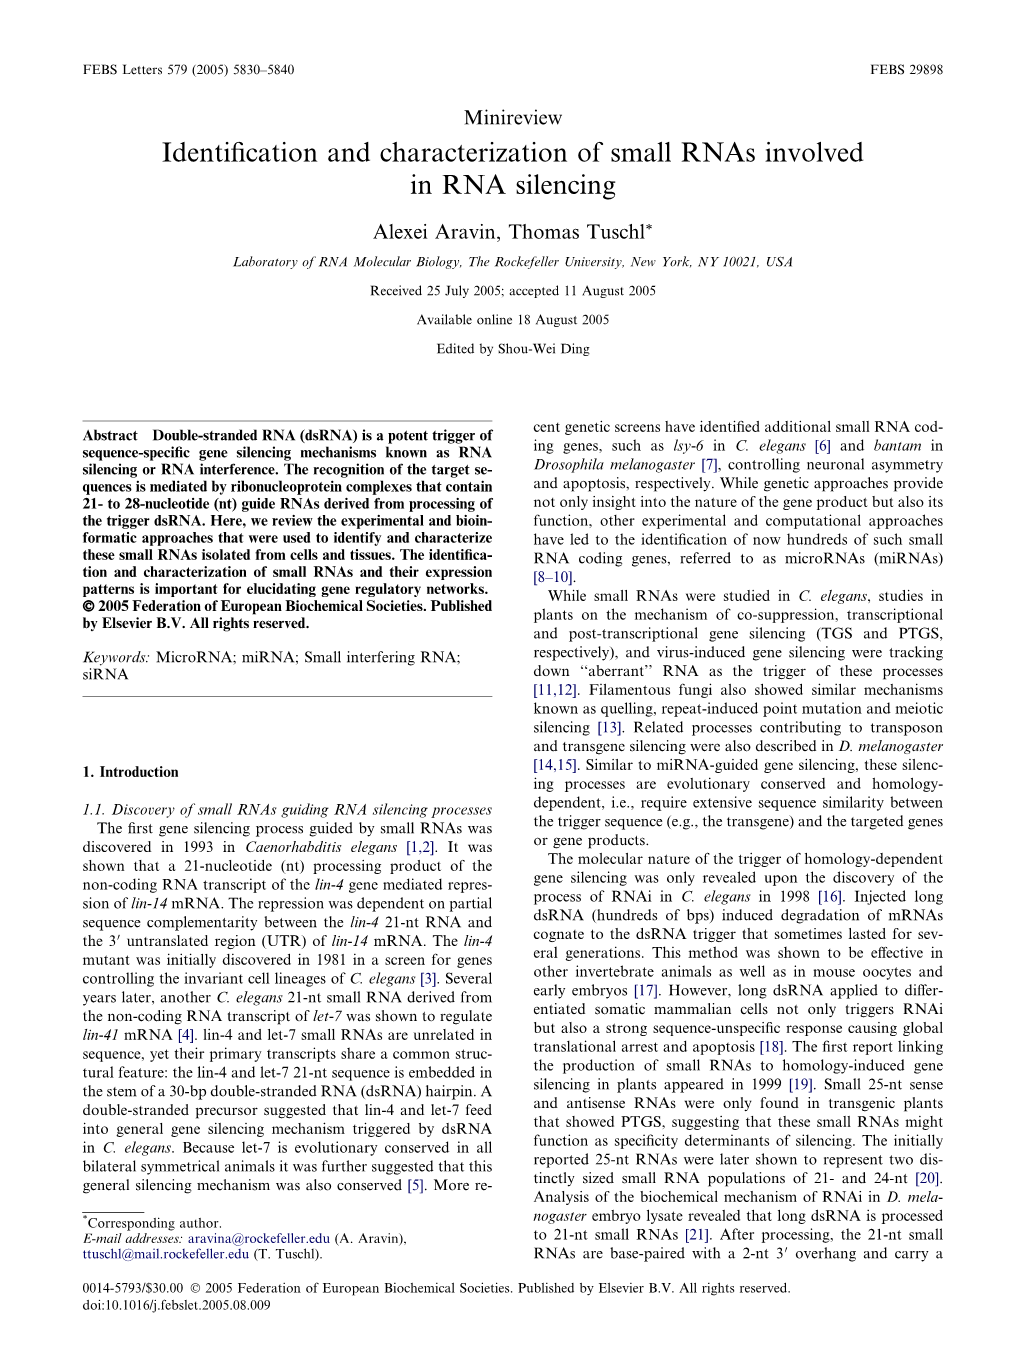 Identification and Characterization of Small Rnas Involved in RNA Silencing